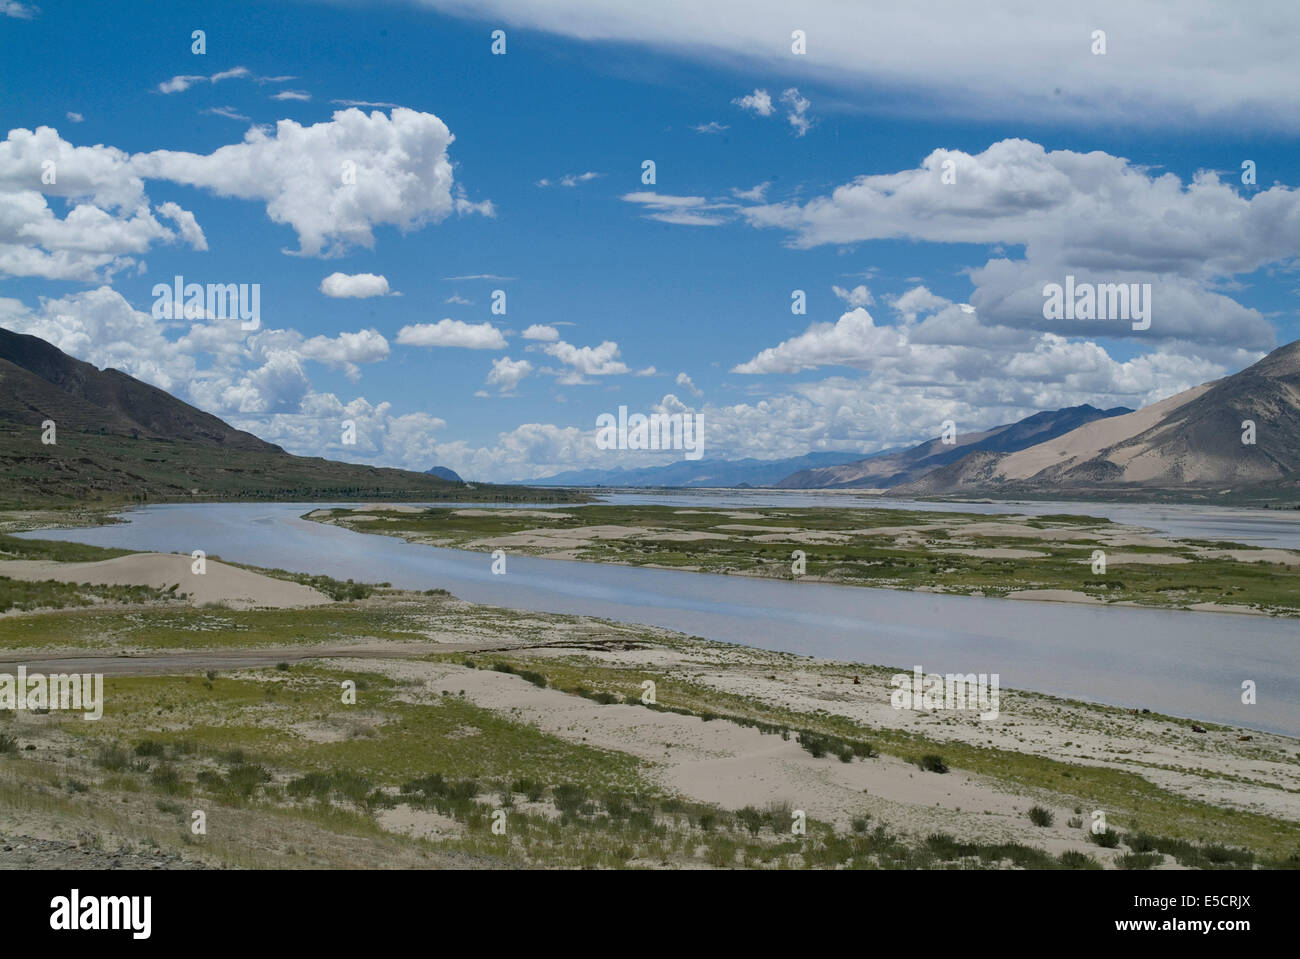 View over river in the Tibetan plateau, China Stock Photo